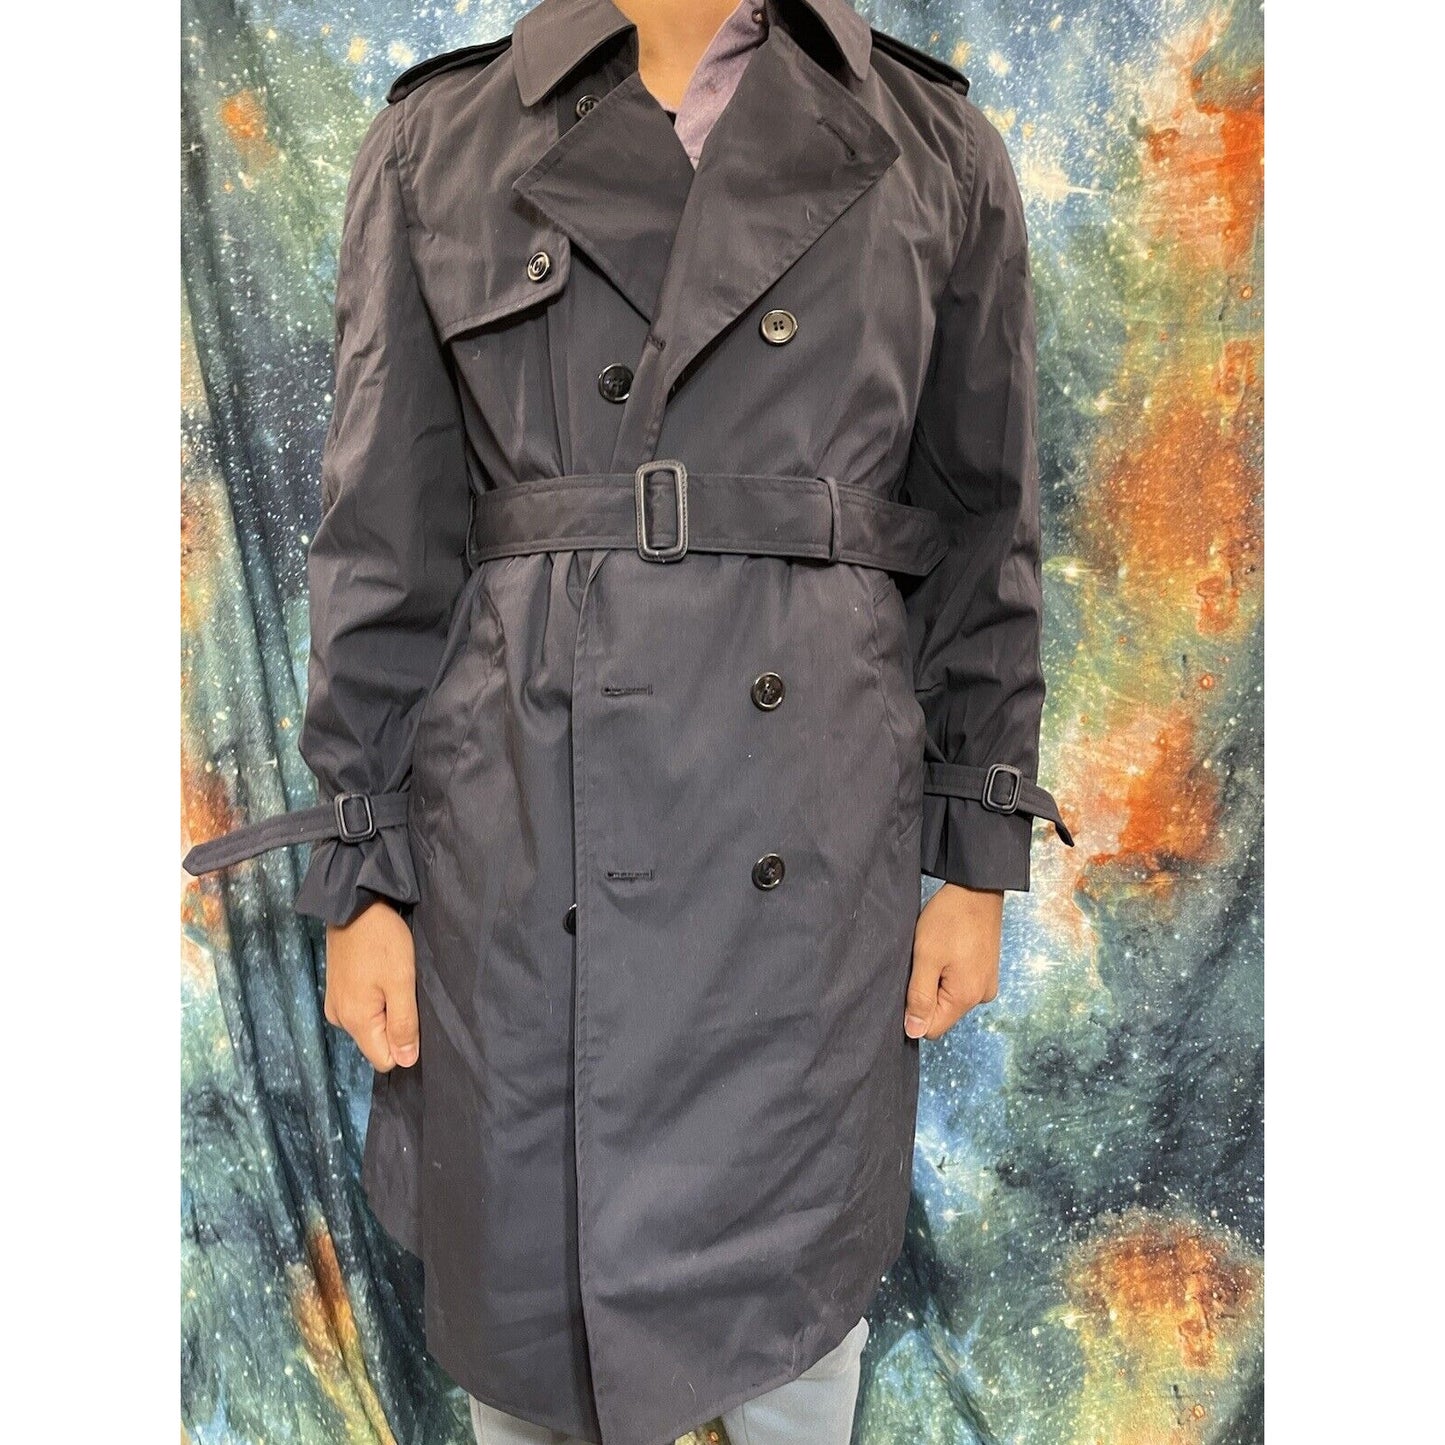 Air Force Dress Blues Trenchcoat with liner 40R Dark Blue